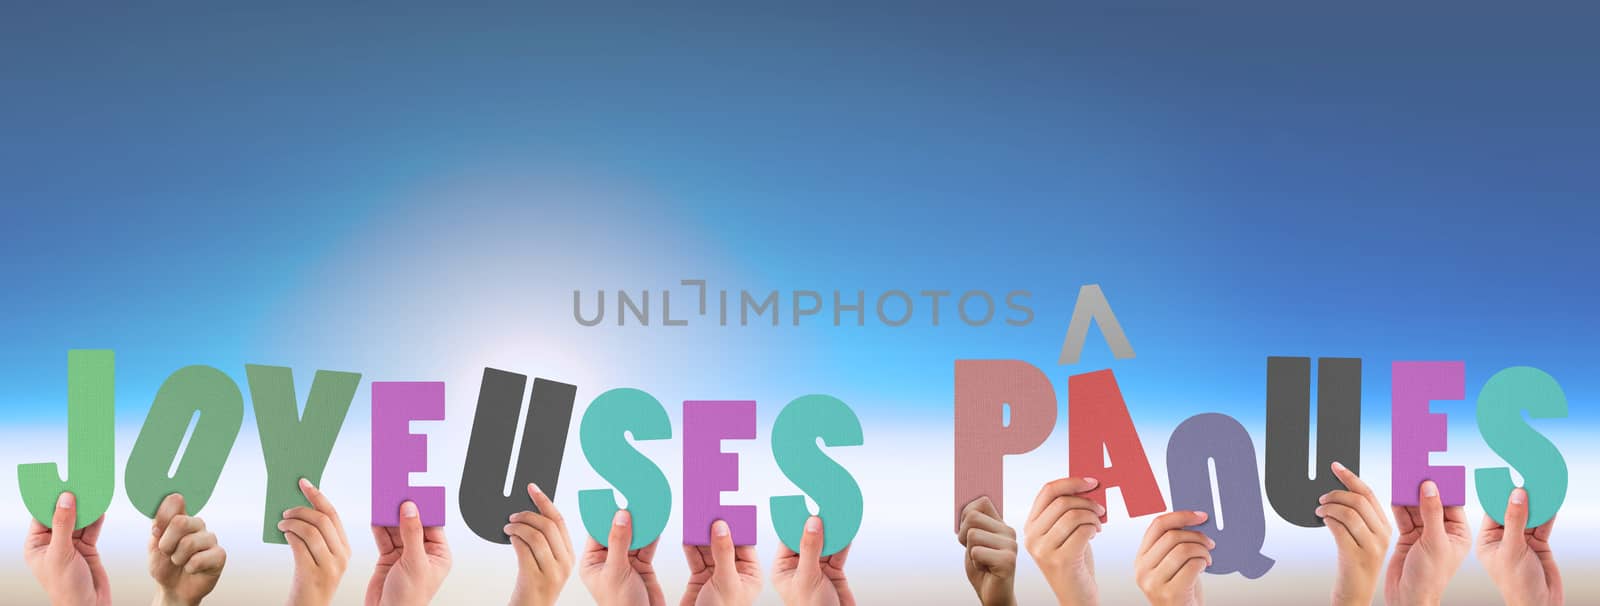 Composite image of hands holding up joyeuses pasques by Wavebreakmedia